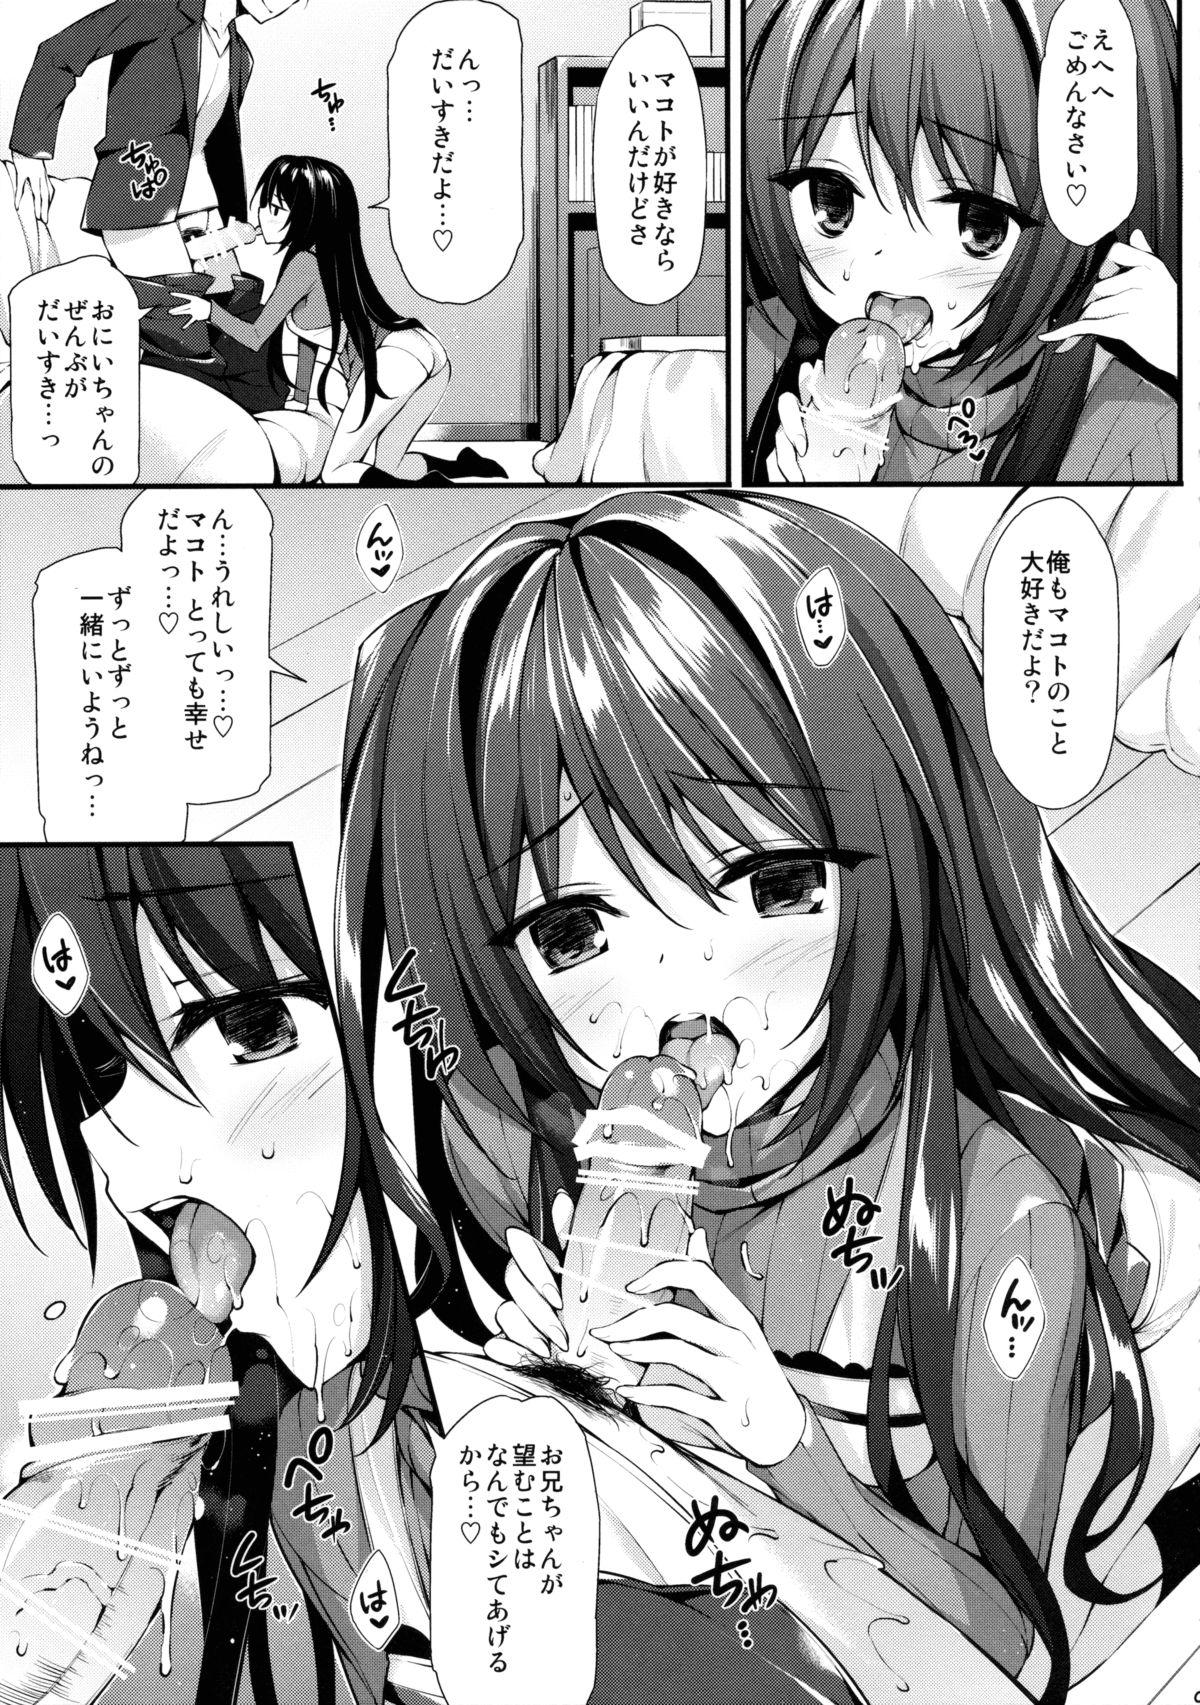 Indo (C89) [P:P (Oryou)] Onii-chan Senyou Makoto-chan (Tokyo 7th Sisters) - Tokyo 7th sisters Ex Girlfriends - Page 8